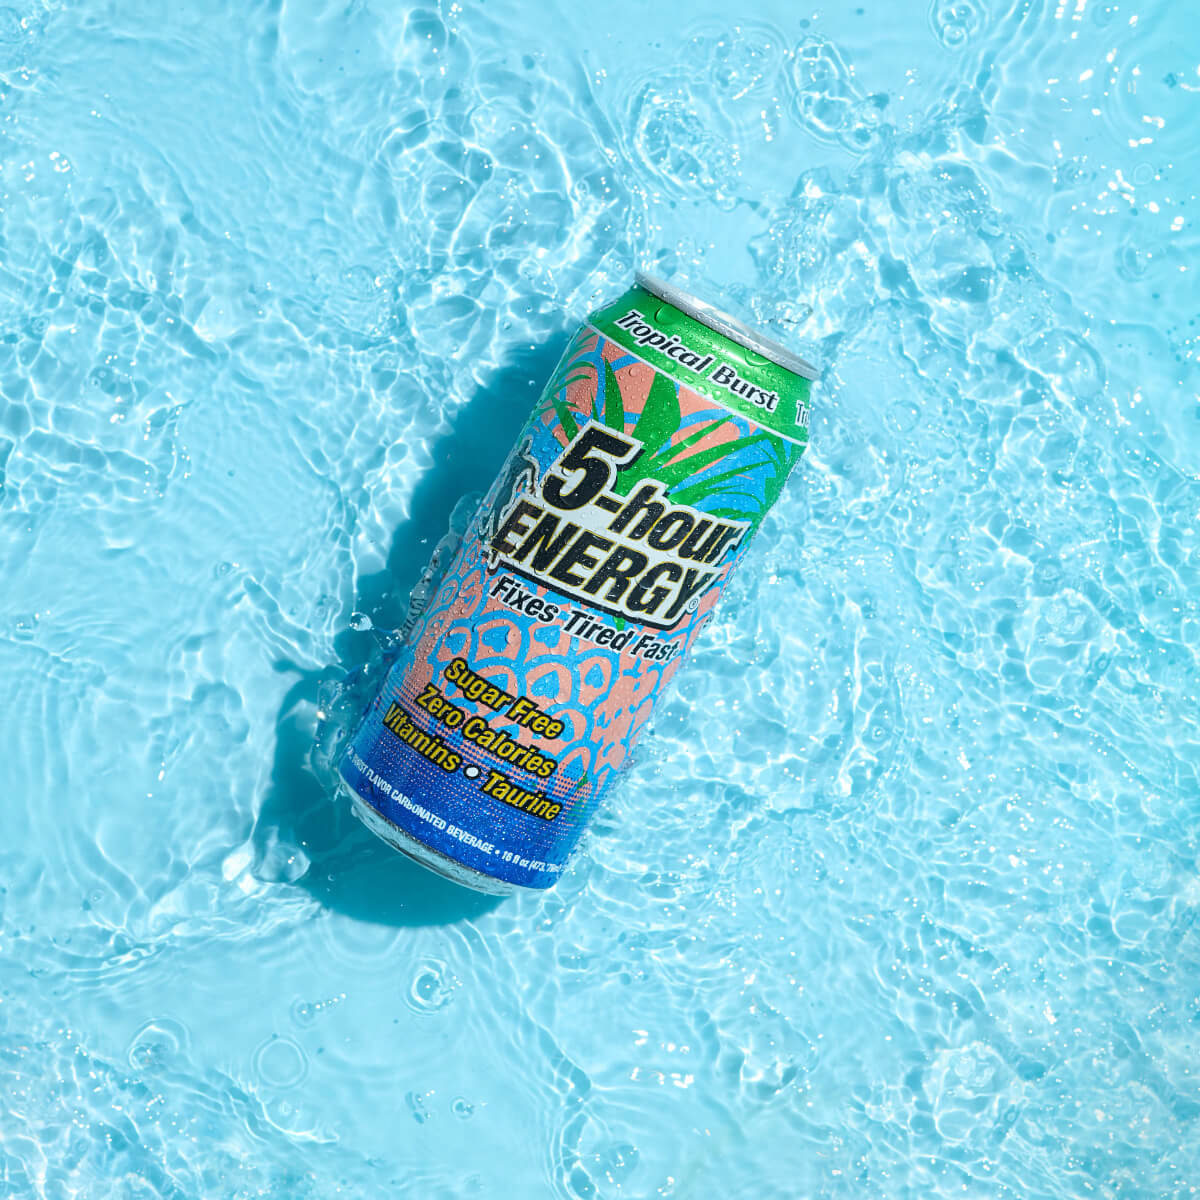 Individual can of 5-hour ENERGY Tropical Burst in water